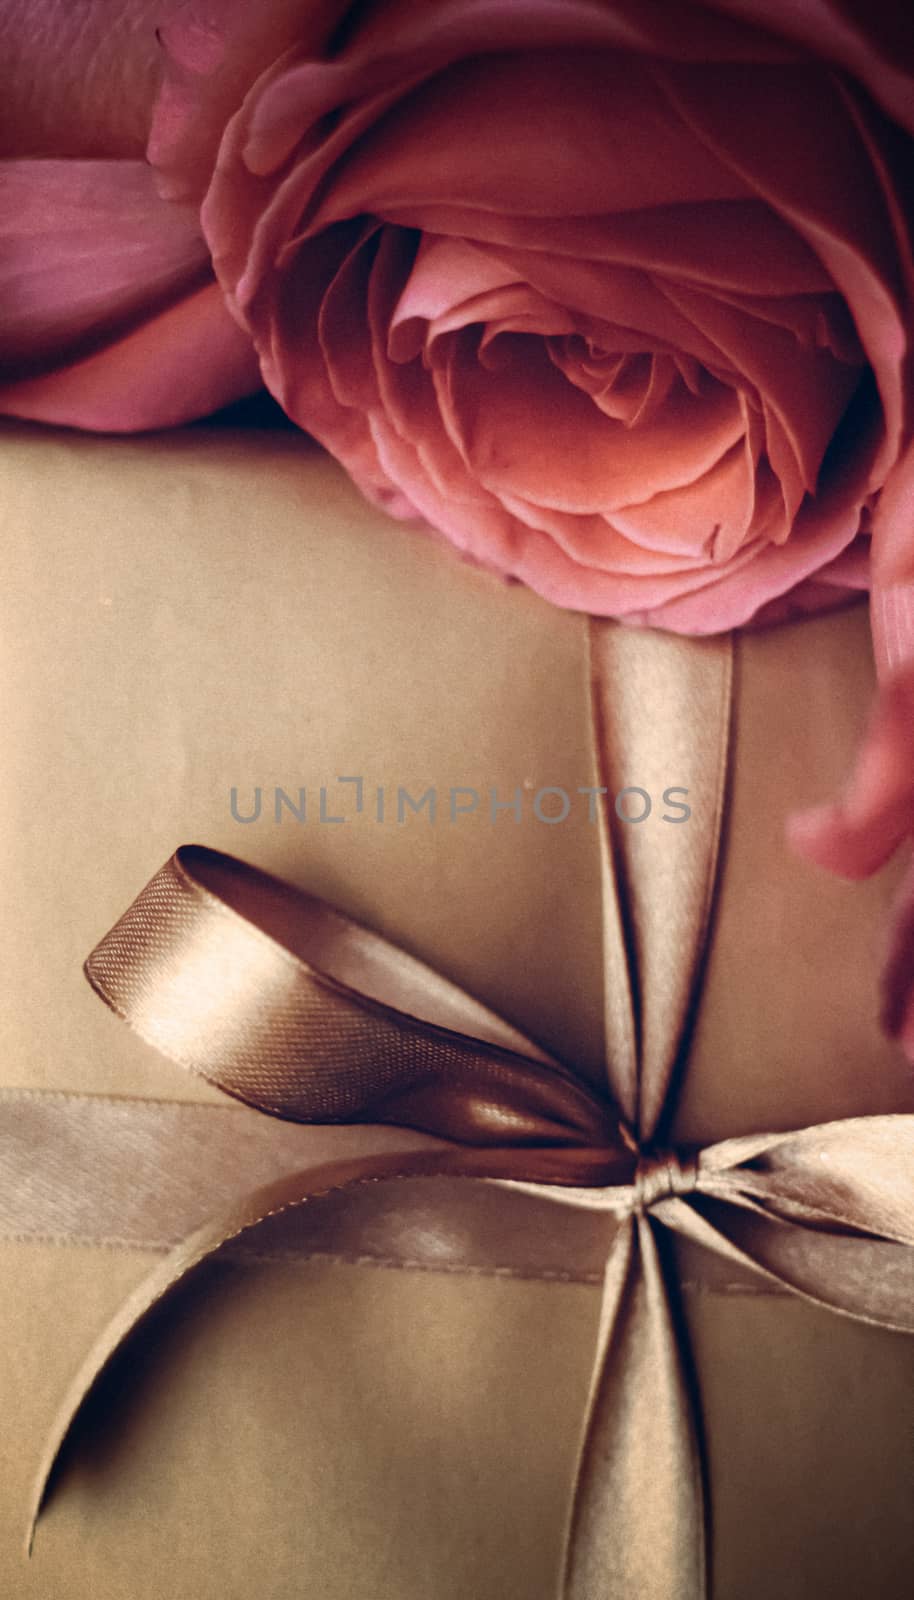 Luxury holiday golden gift box and bouquet of roses as Christmas by Anneleven